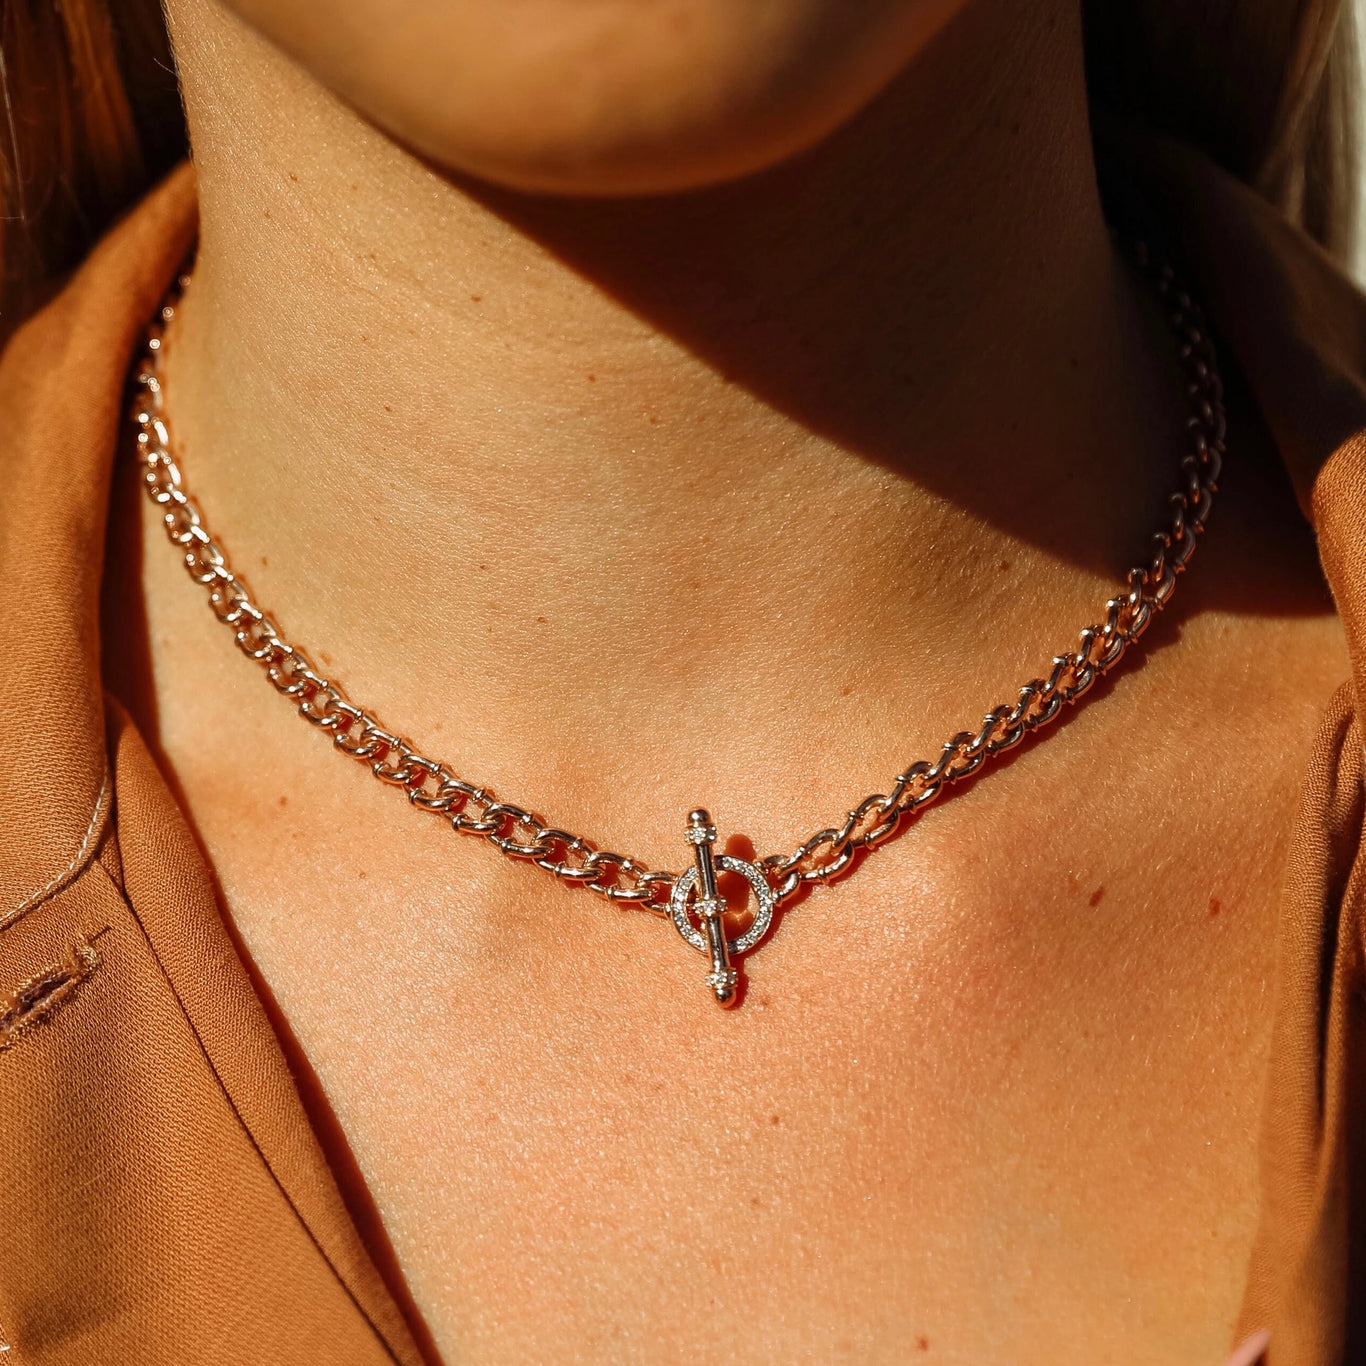 Tag Link Necklace shown in Rose Gold, 16" length.